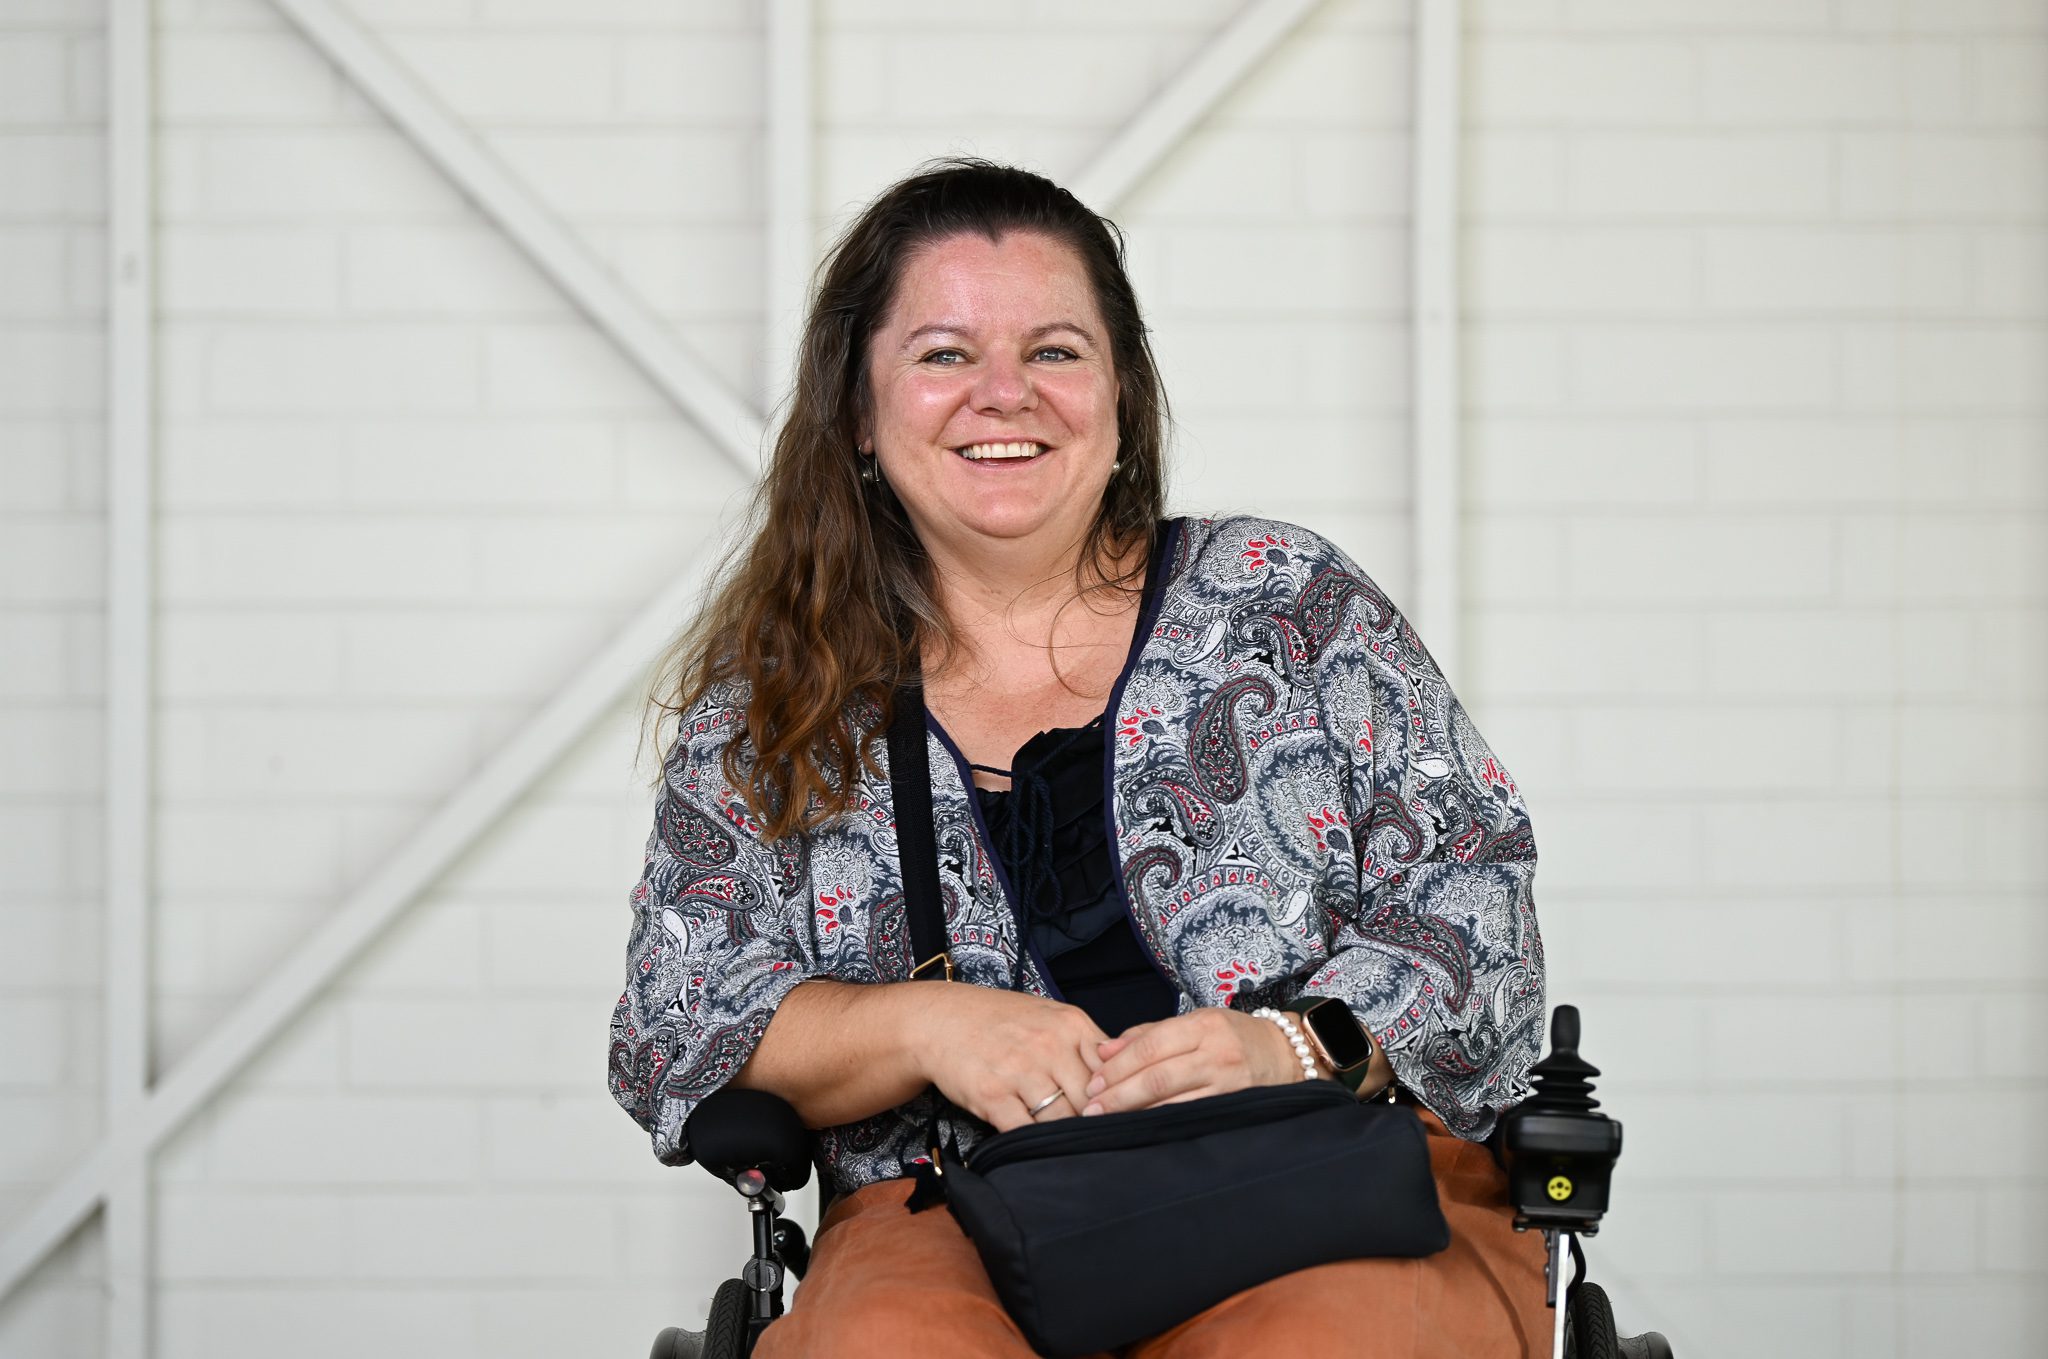 A woman with long brown hair, wearing a patterened shirt and holding a black back, she is sitting in a wheelchair and smiling at the camera.